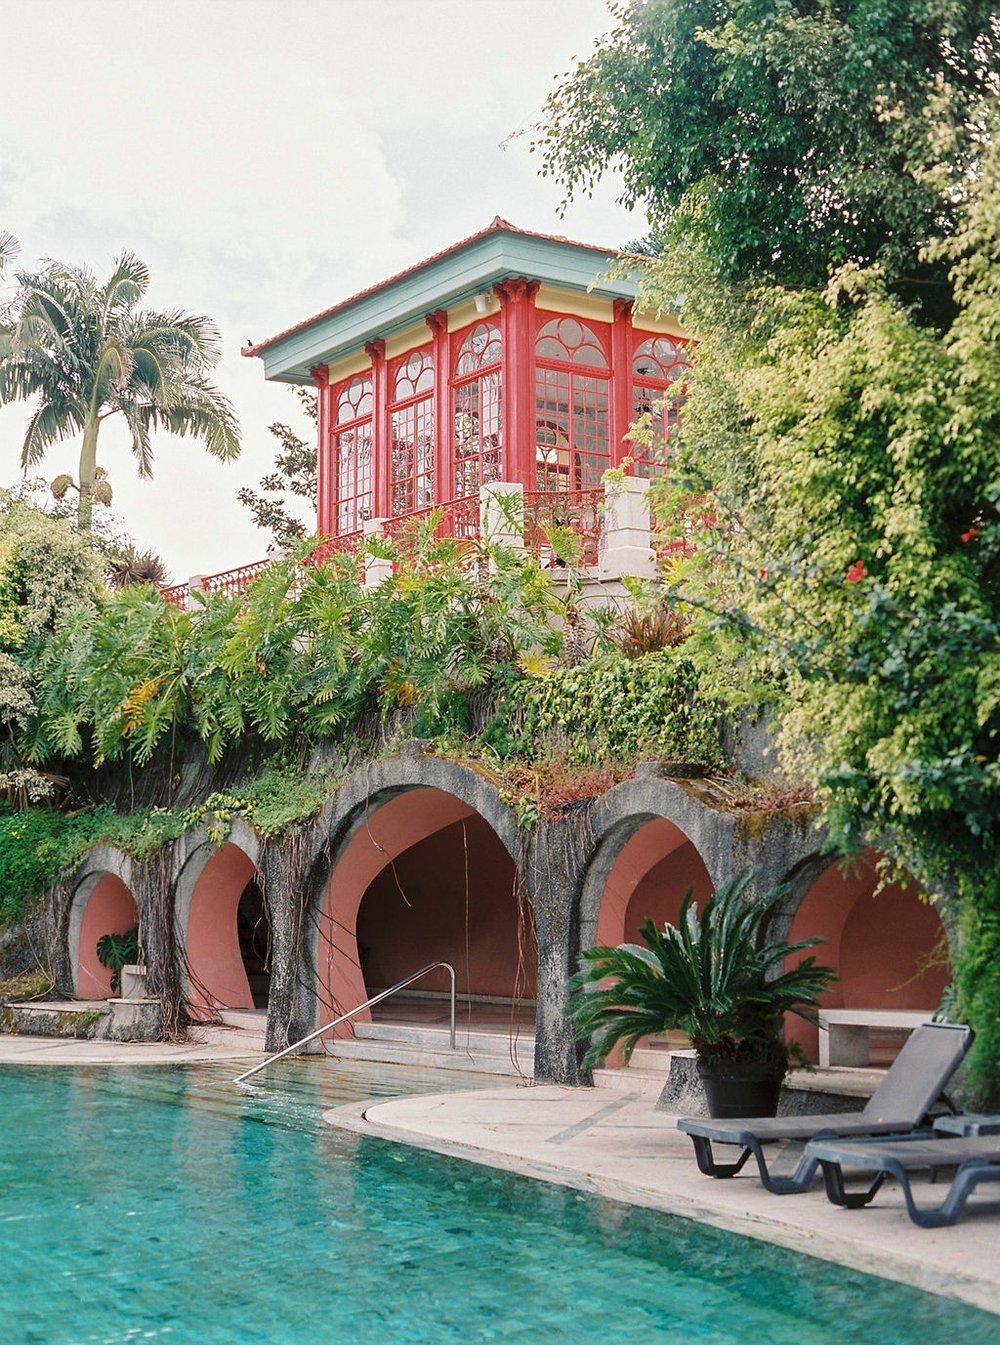 Photos of the red building in the gardens of Pestana Palace in Lisbon with the allure of the Chinese architecture, with a pool in the front